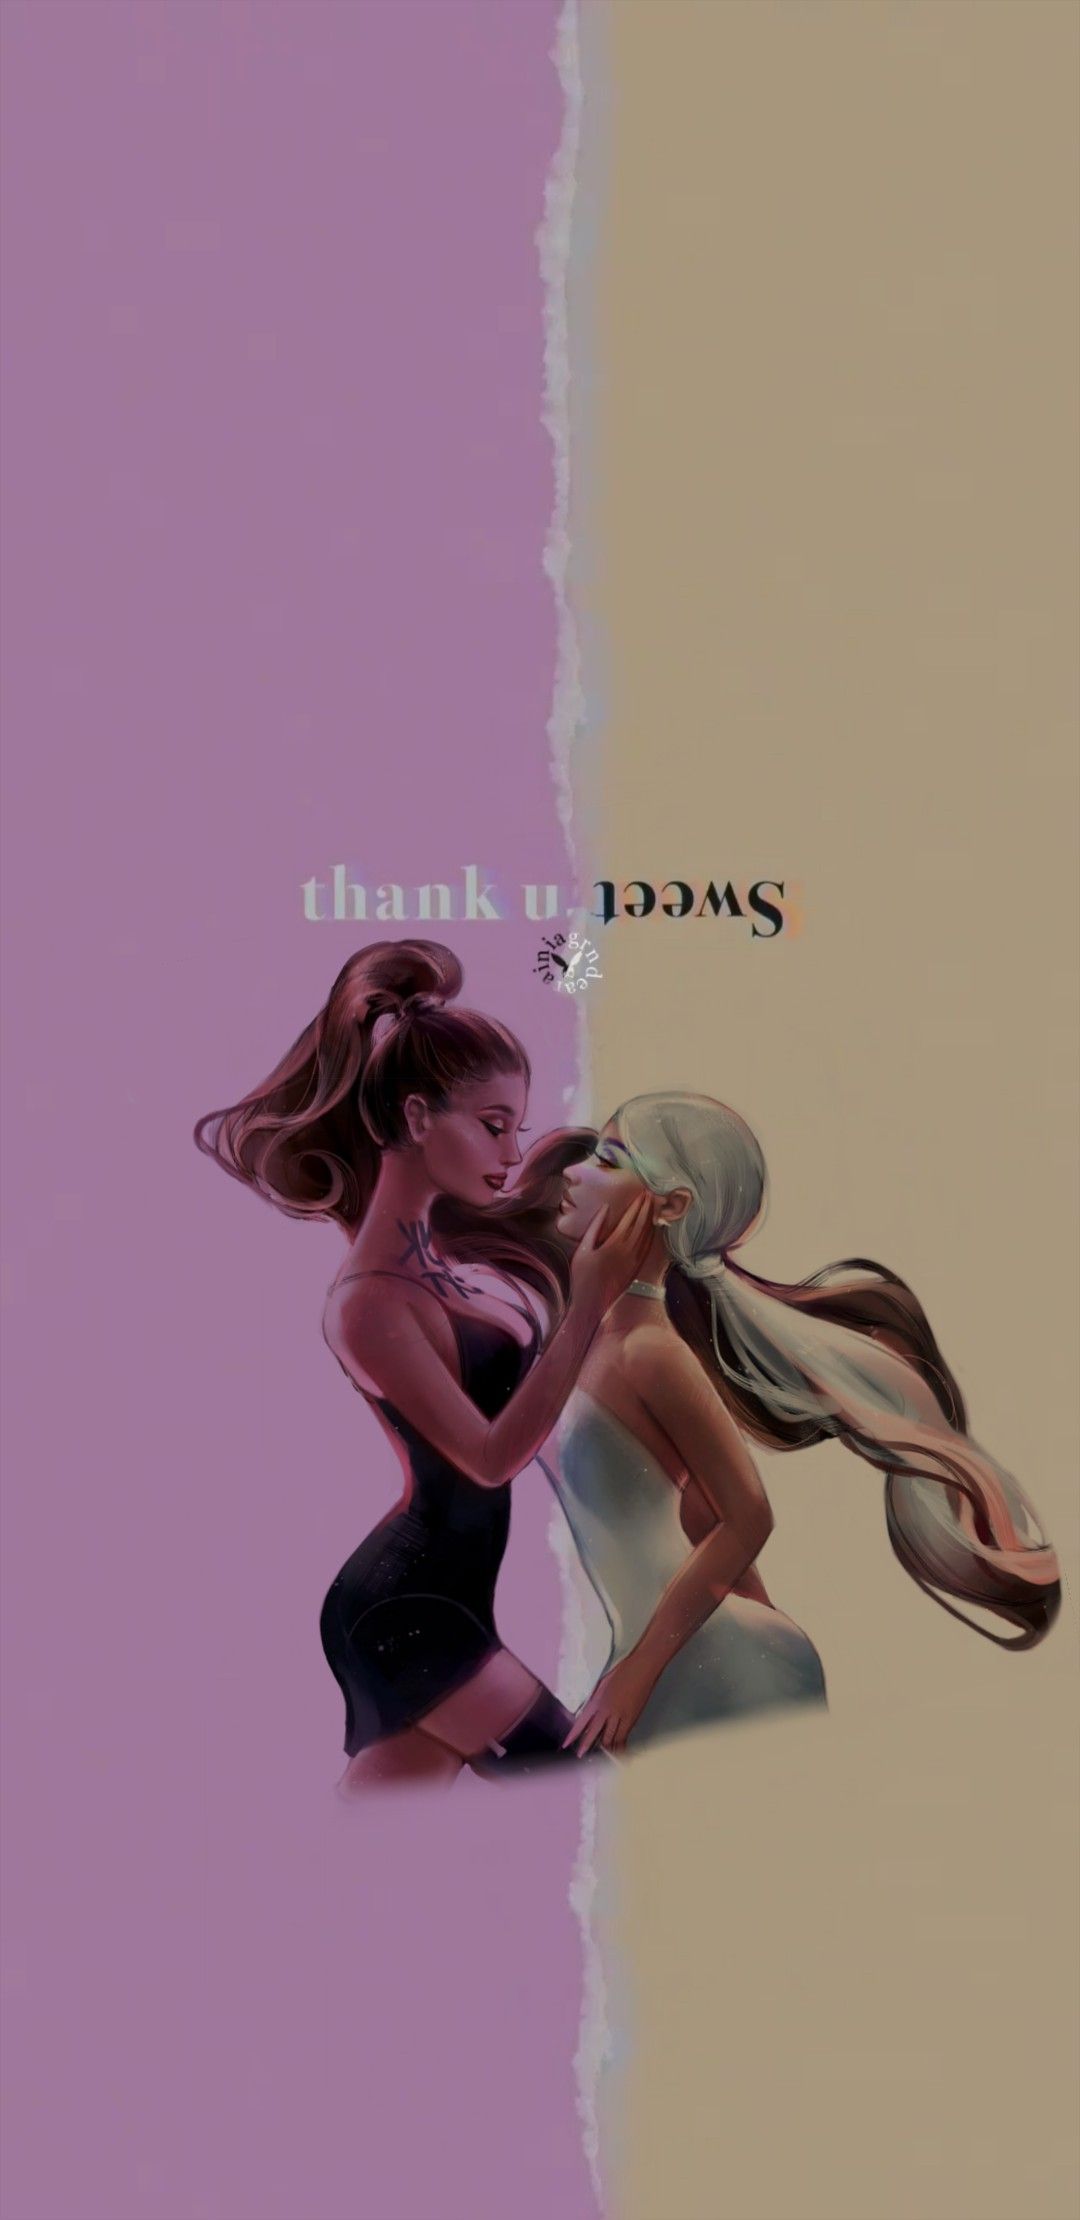 Free download ariana grande wallpaper art made by dyllustrates on ig Ariana [1080x2220] for your Desktop, Mobile & Tablet. Explore Ariana Grande Album Wallpaper. Album Cover Wallpaper, Album Wallpaper